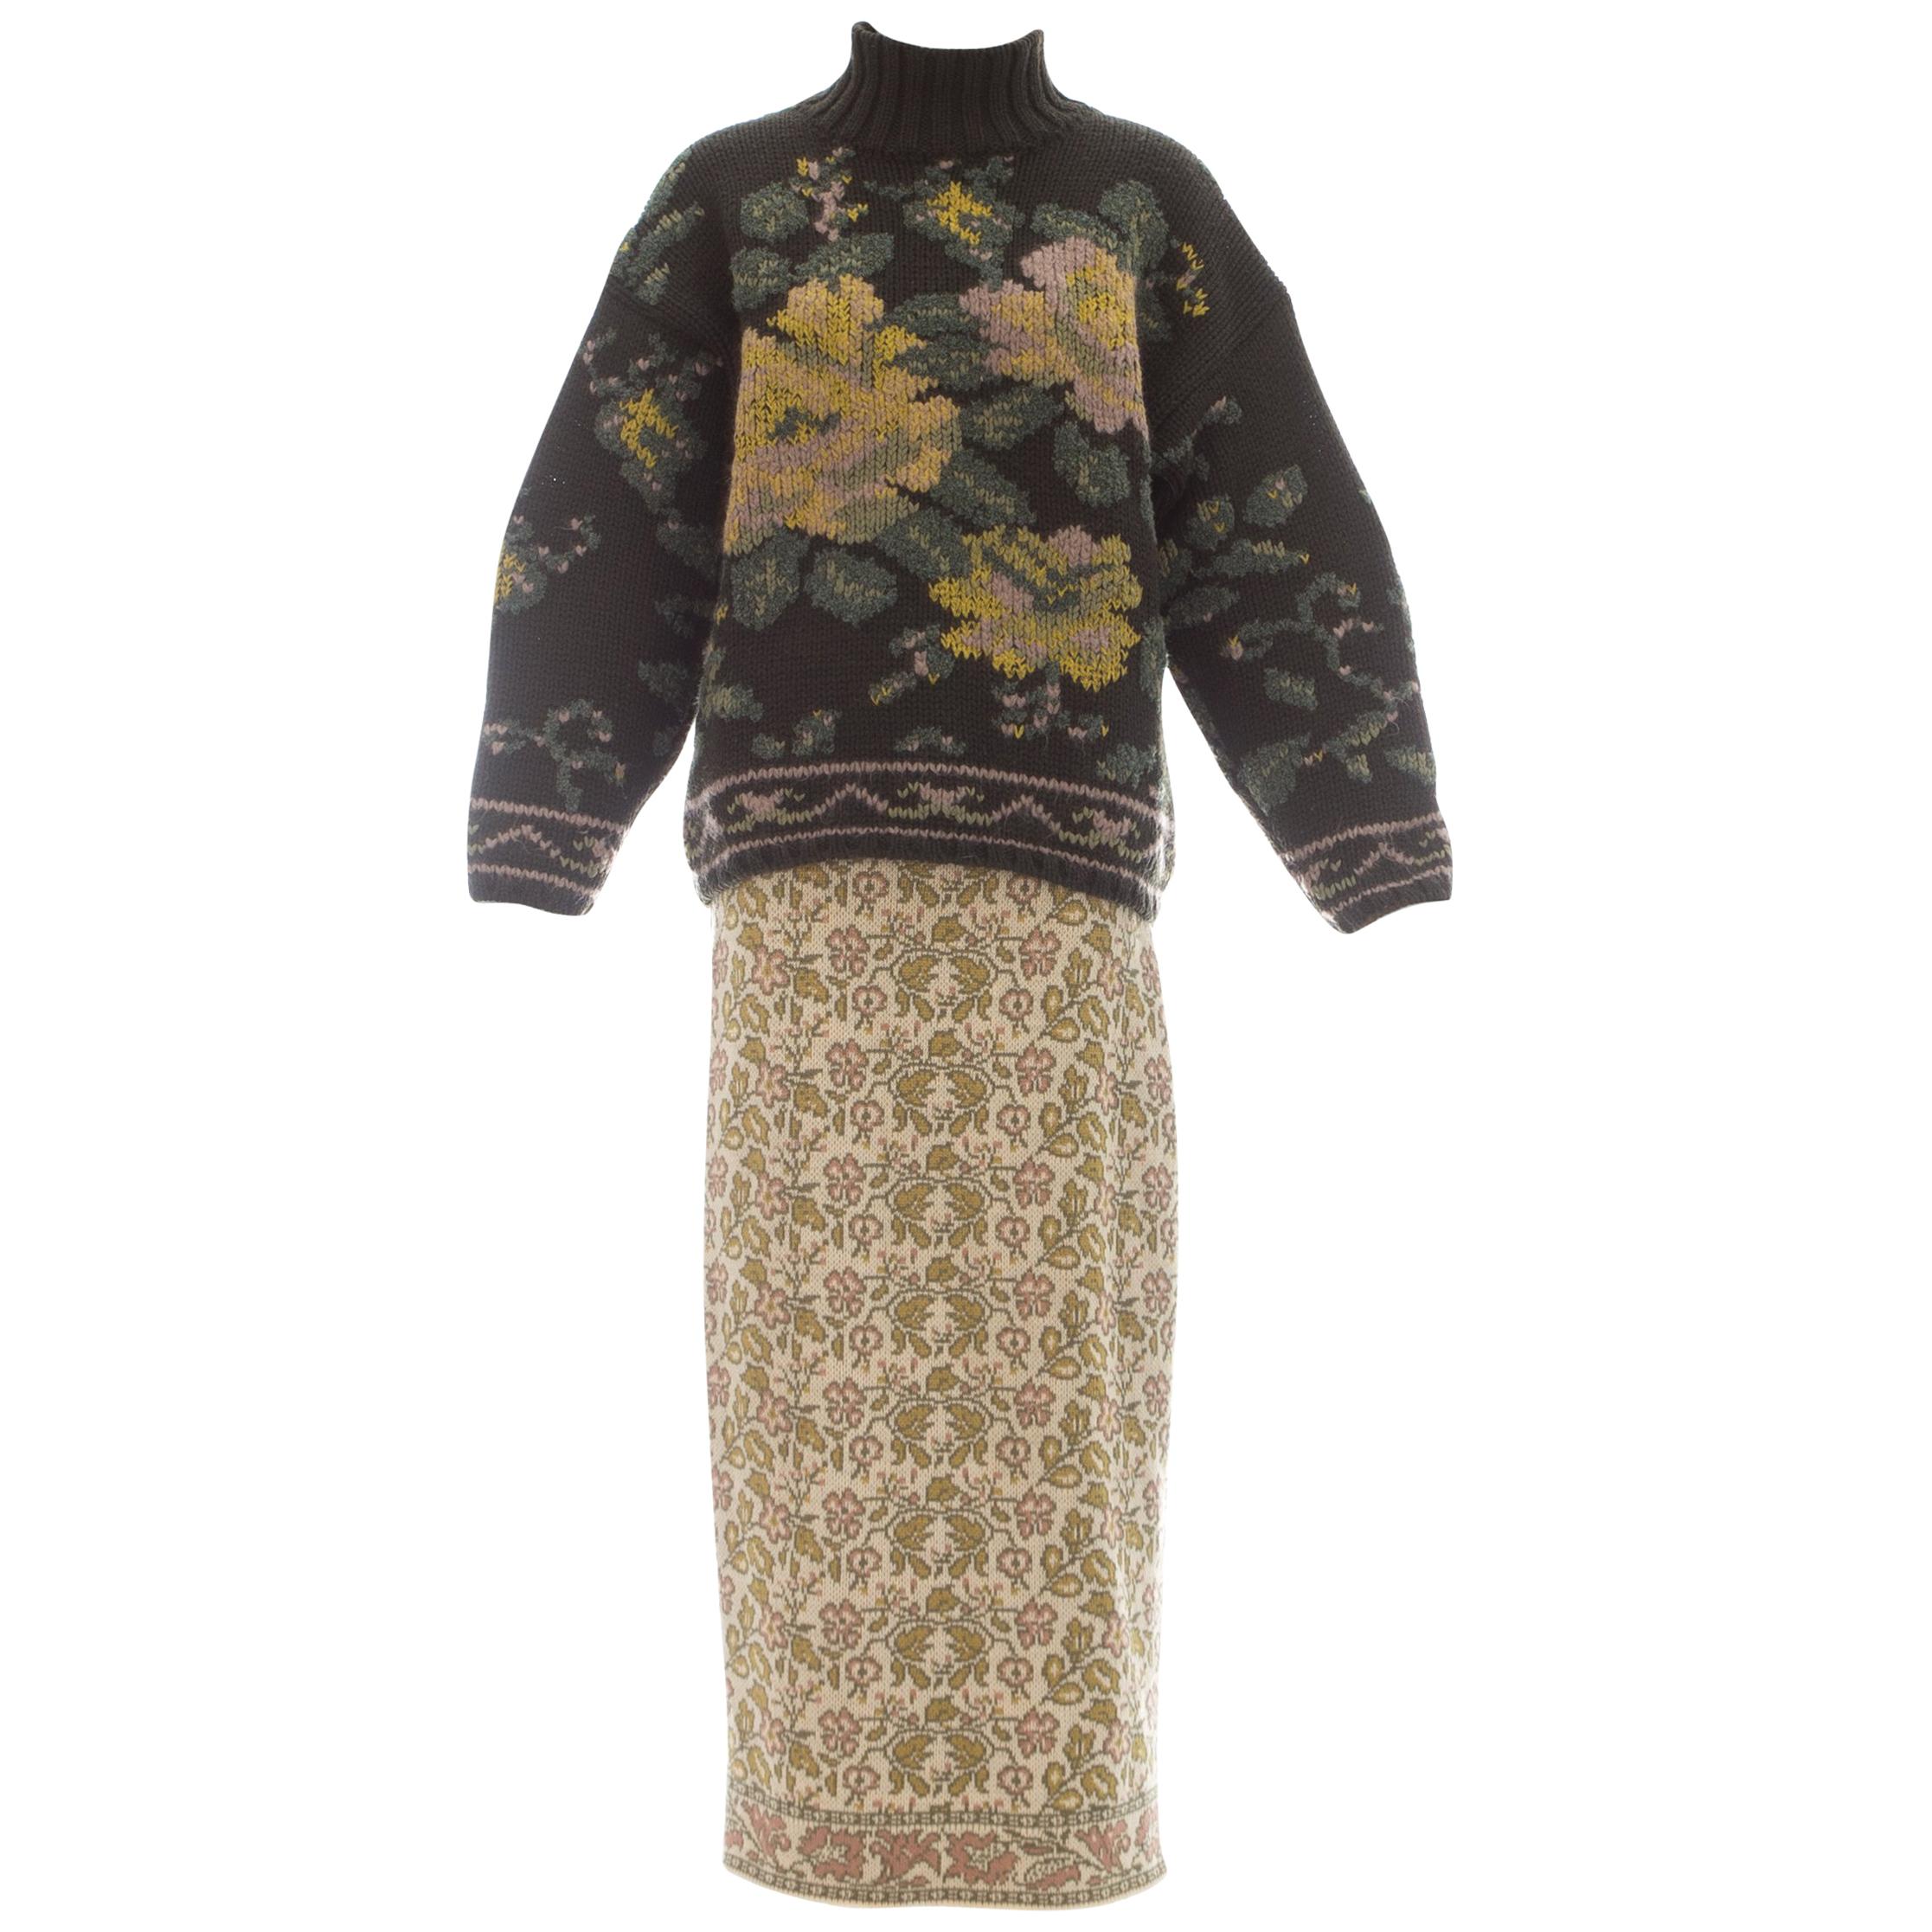 Jean Paul Gaultier knitted wool floral tapestry sweater and skirt set, fw 1984 For Sale